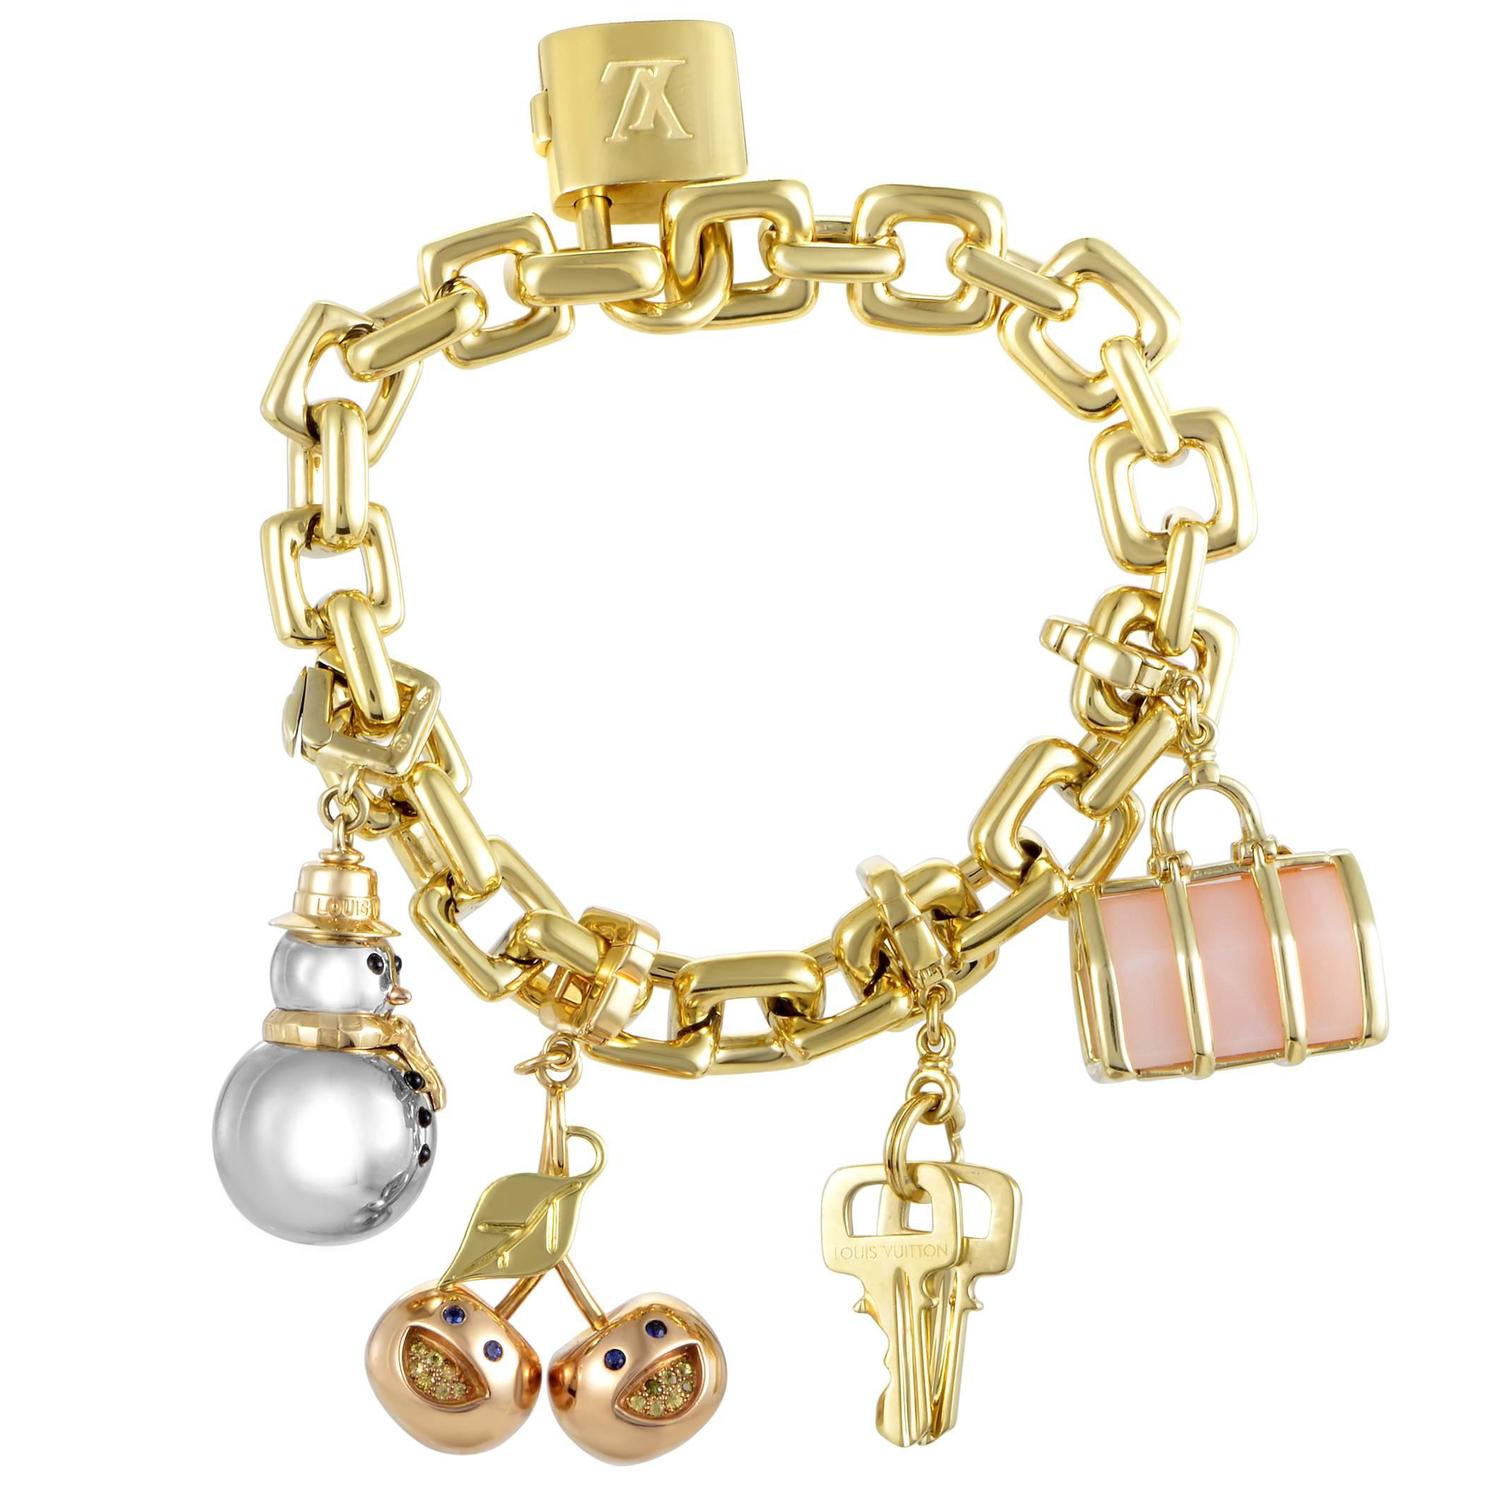 Louis Vuitton Yellow Gold Charm Bracelet For Sale at 1stdibs